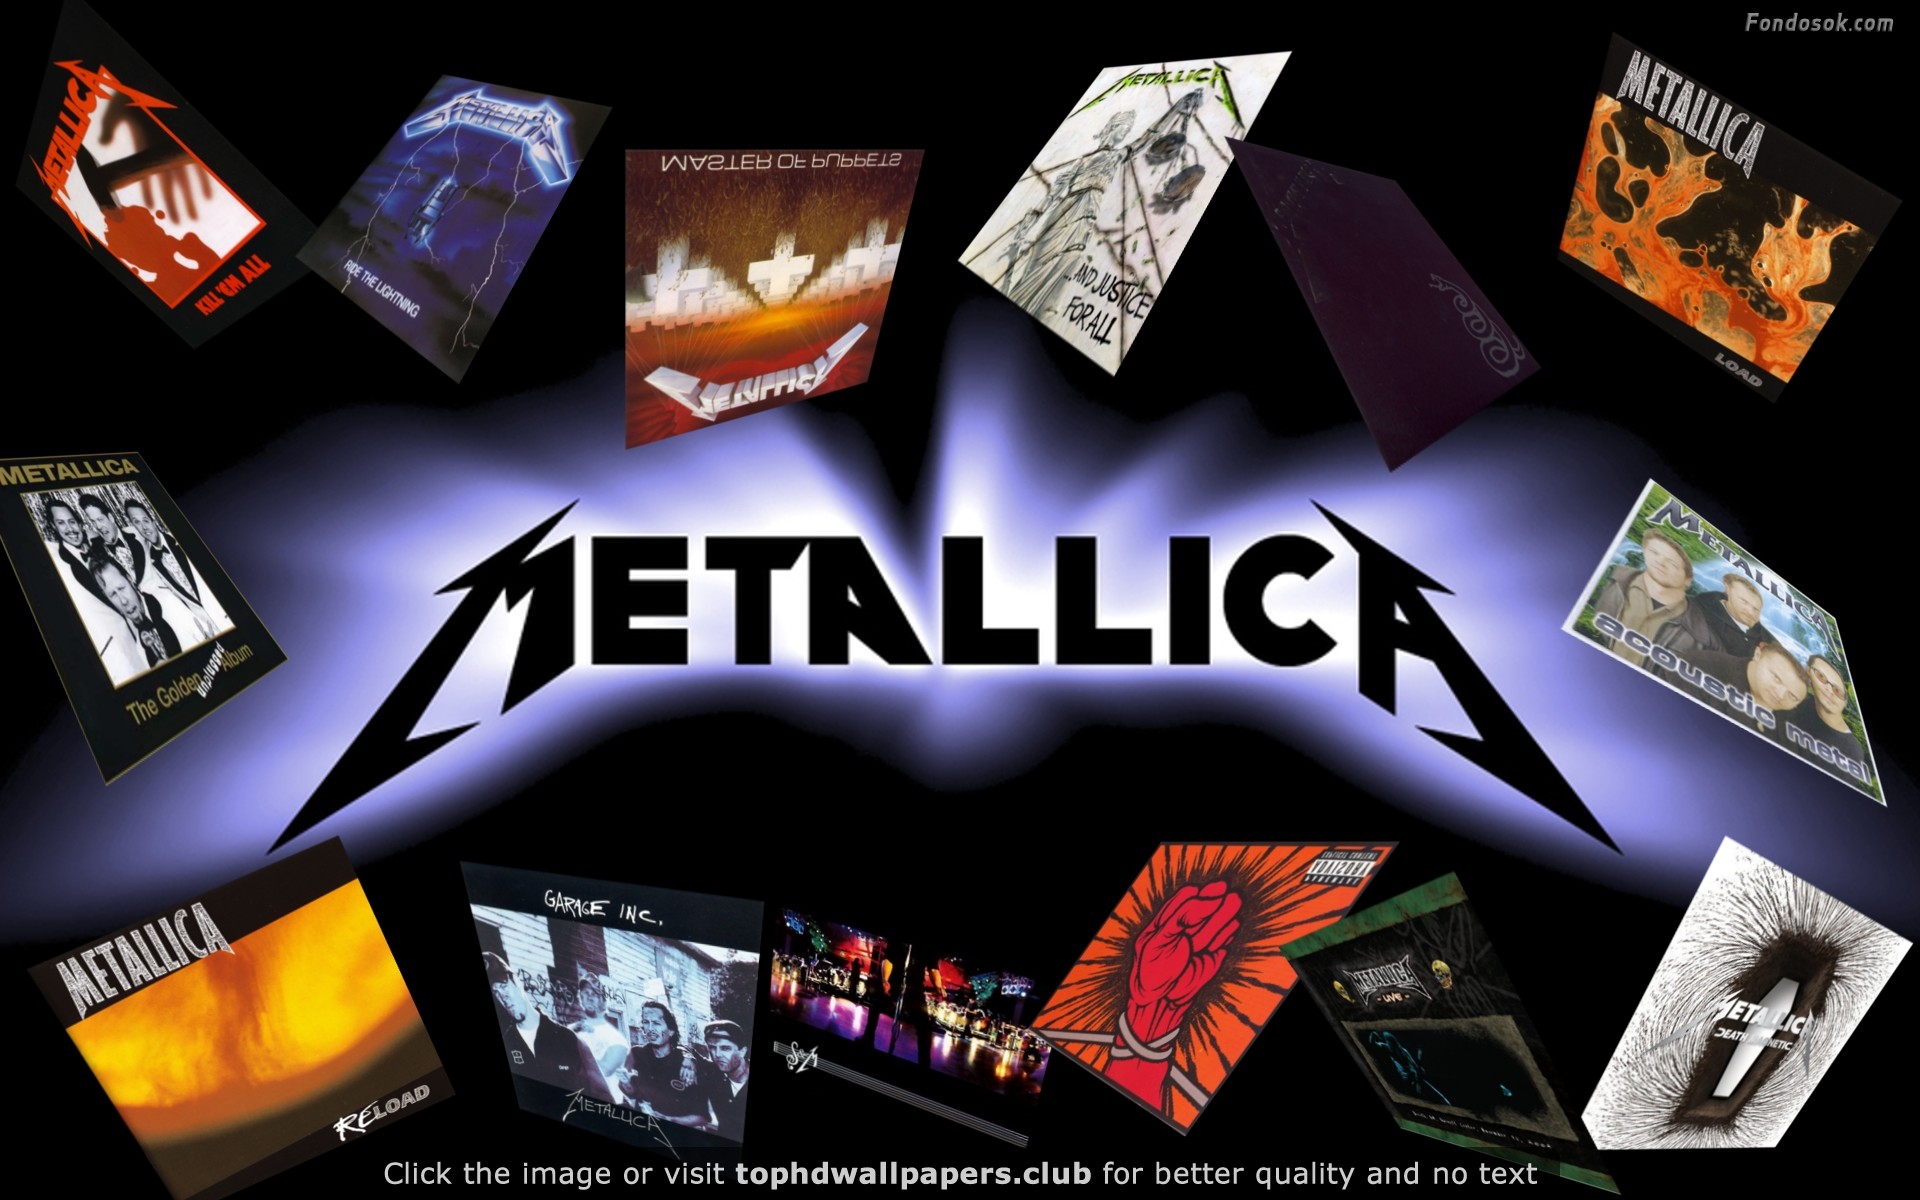 1920x1200 Metallica Albums HD wallpaper for your PC, Mac or Mobile device